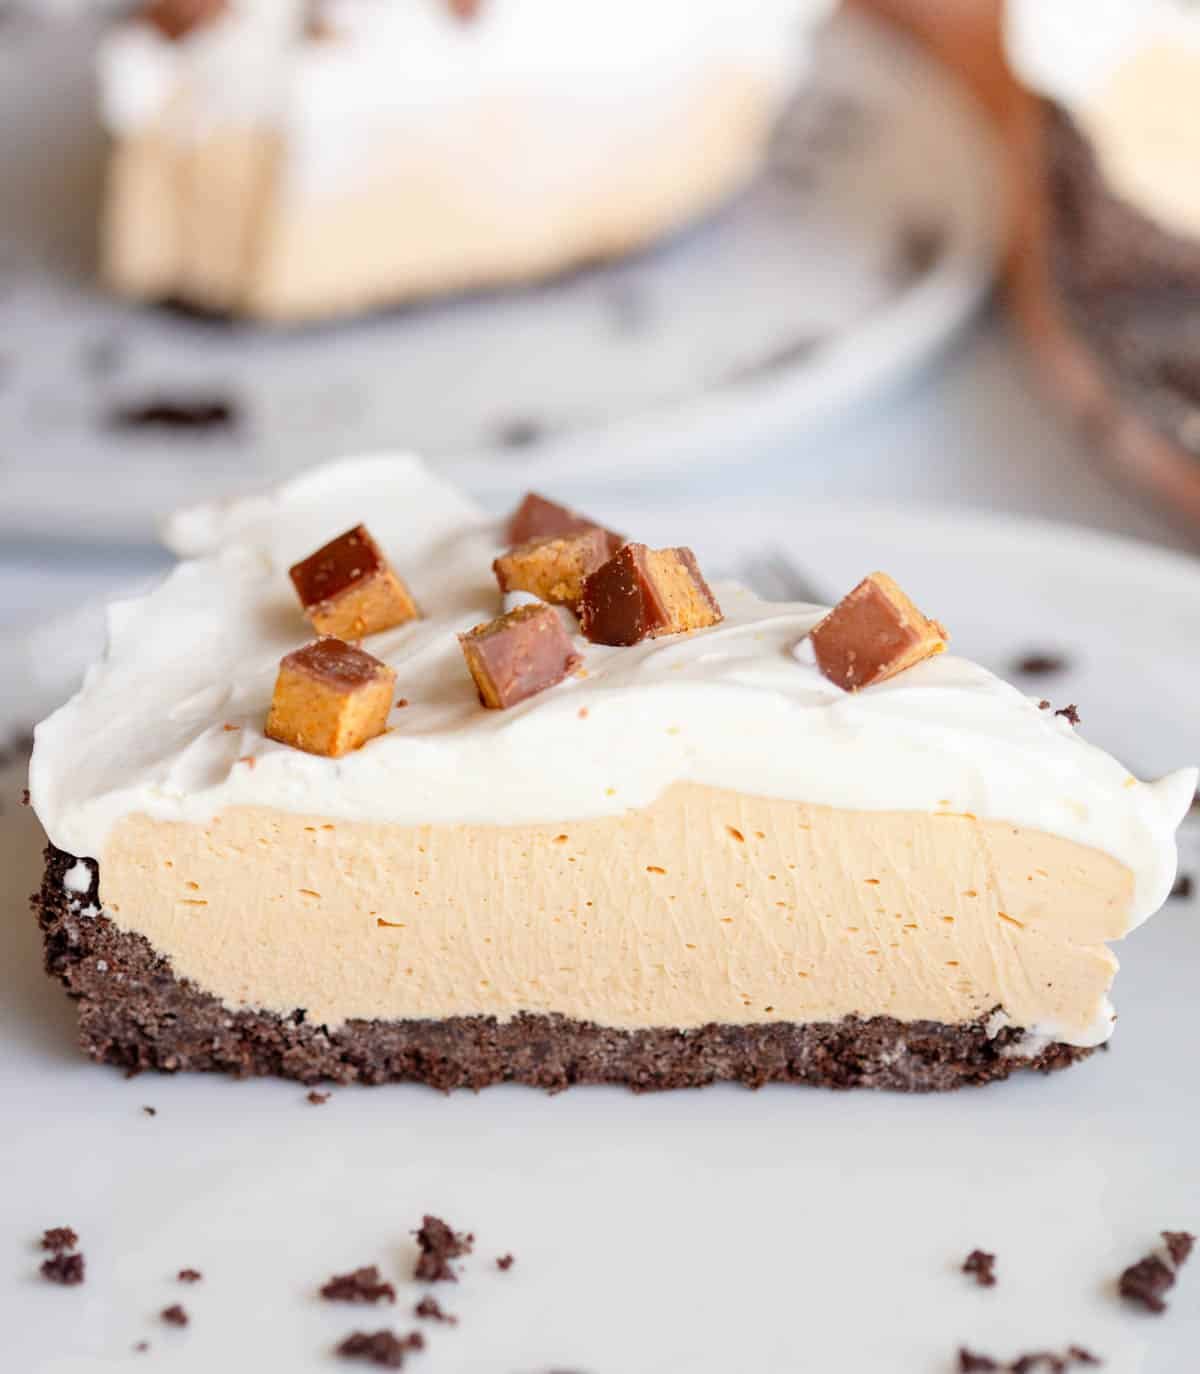 A slice of No Bake Peanut Butter Pie topped with diced peanut butter cups on a white plate with Oreo crumb scattered around it and another slice blurred in the background.